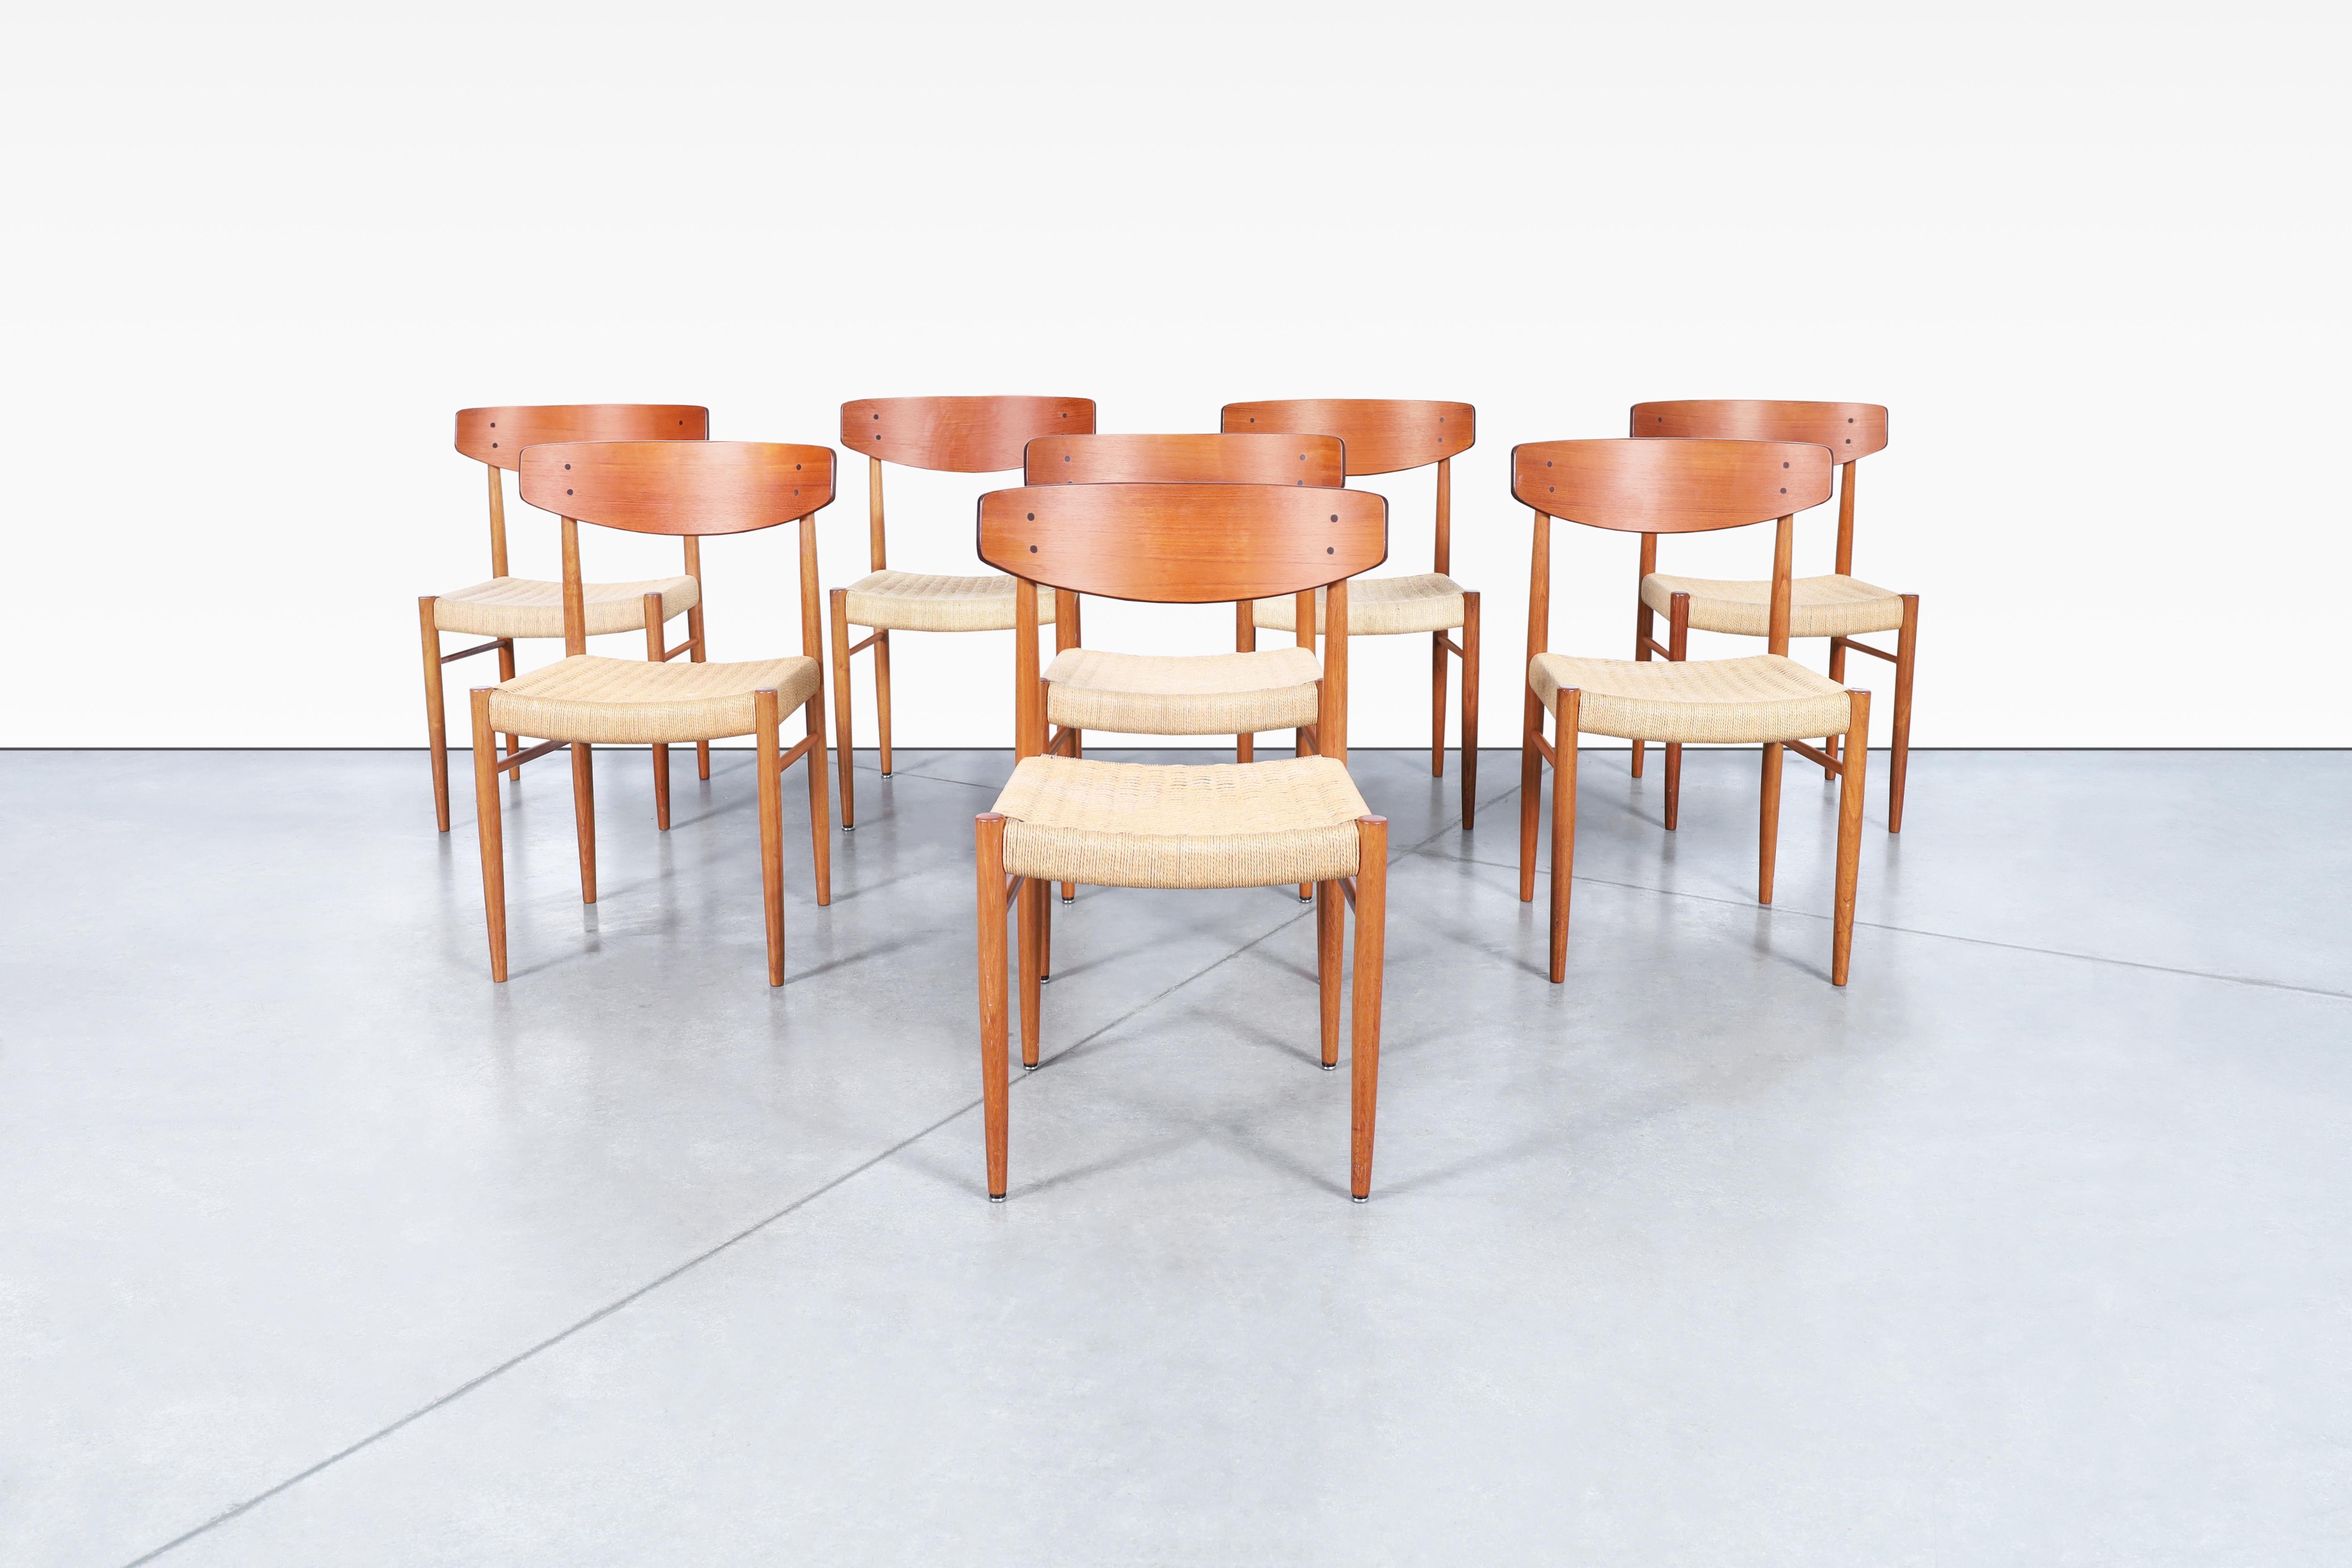 Stunning Danish modern teak dining chairs designed by AM Møbler in Denmark, circa 1960s. These famous chairs, also known as Model 501, are designed with precision and showcase an iconic shape; these dining chairs feature a solid teak frame adorned